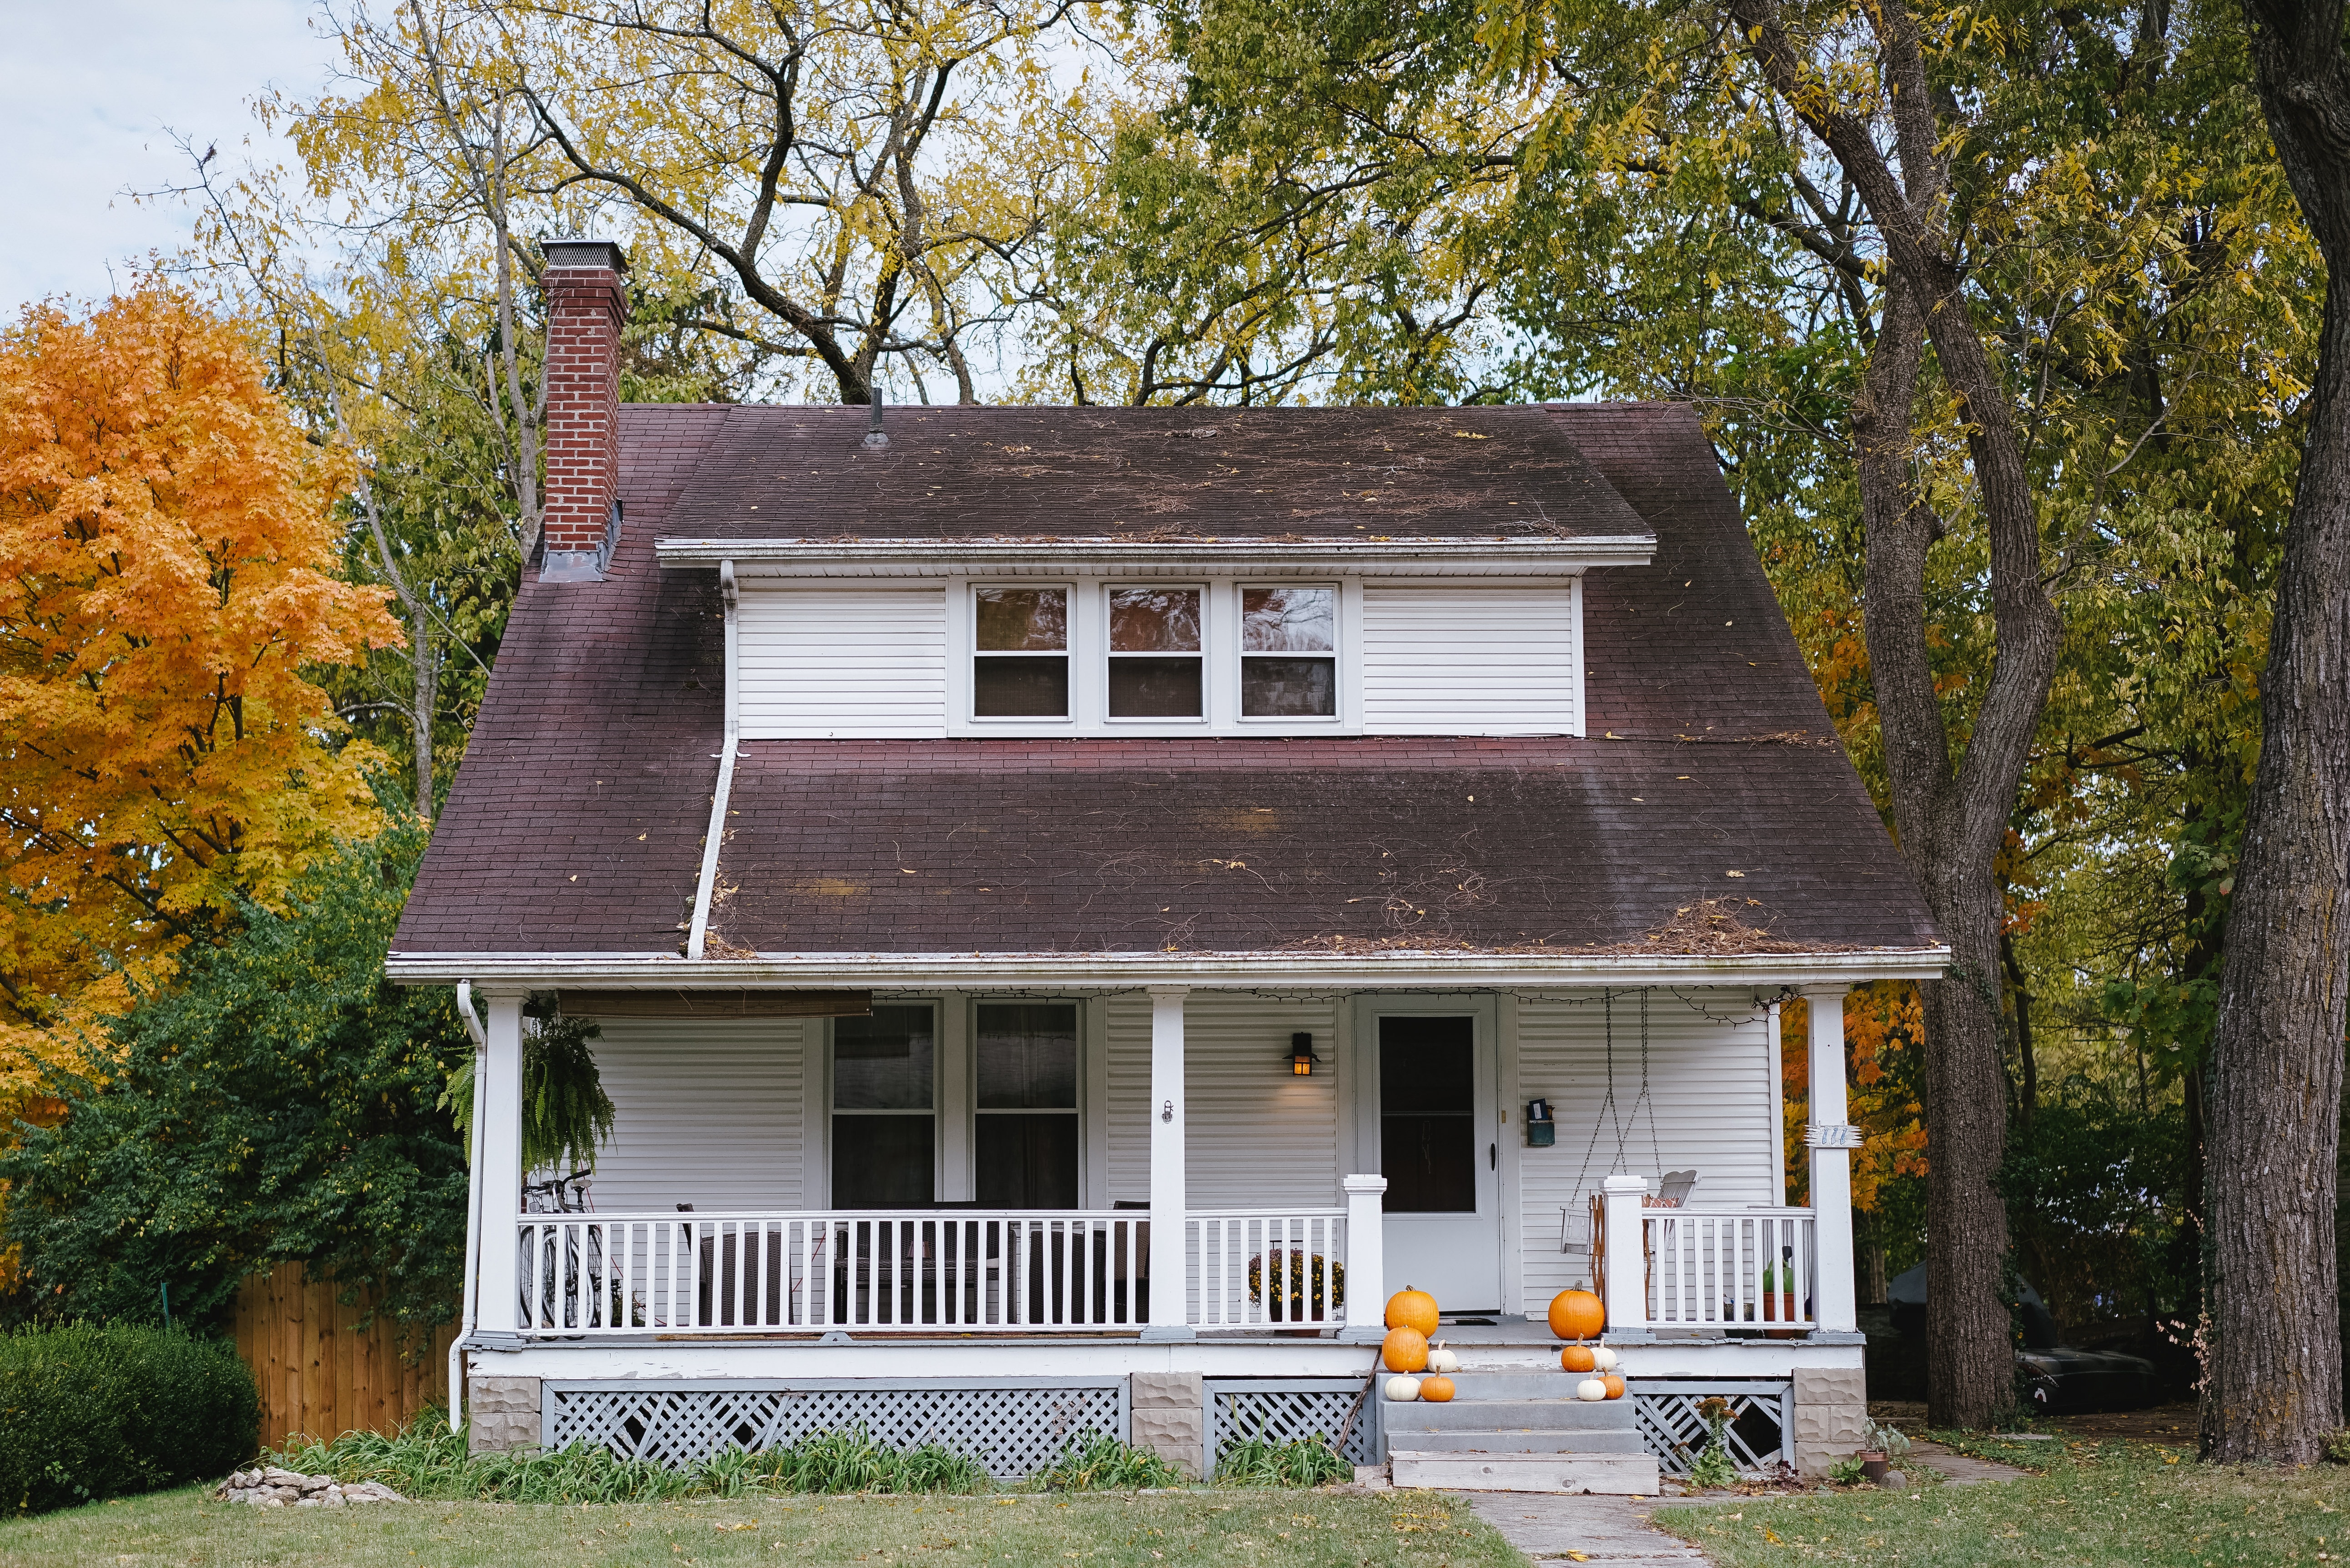 6 Tips for Selling Your Home in the Fall